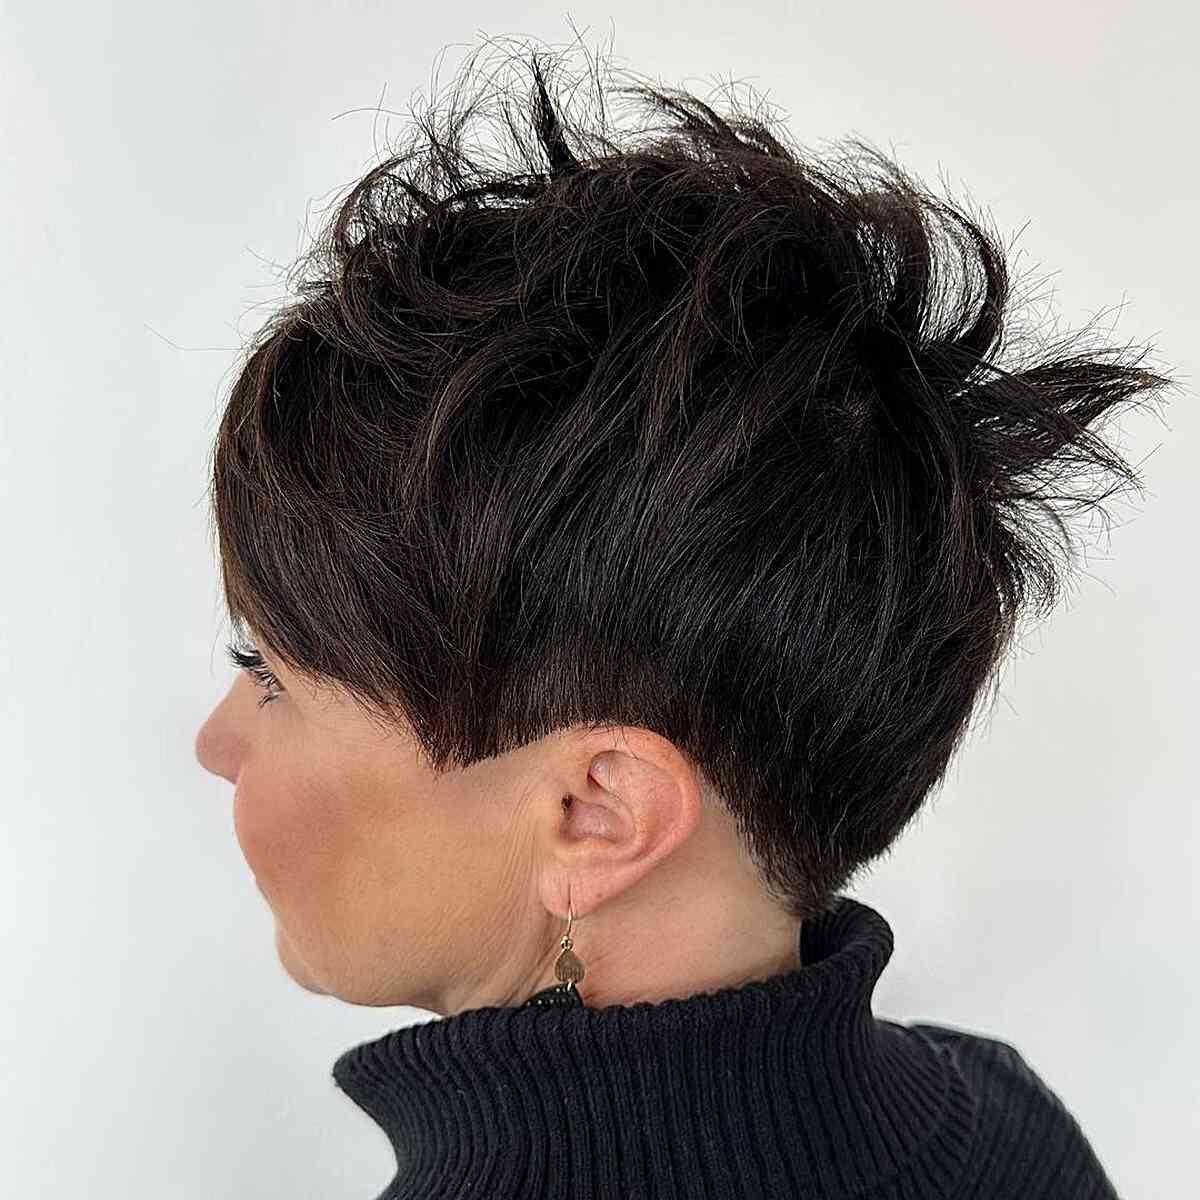 Jet Black Versatile Pixie Cut with a Textured Top for ladies with a low-maintenance style